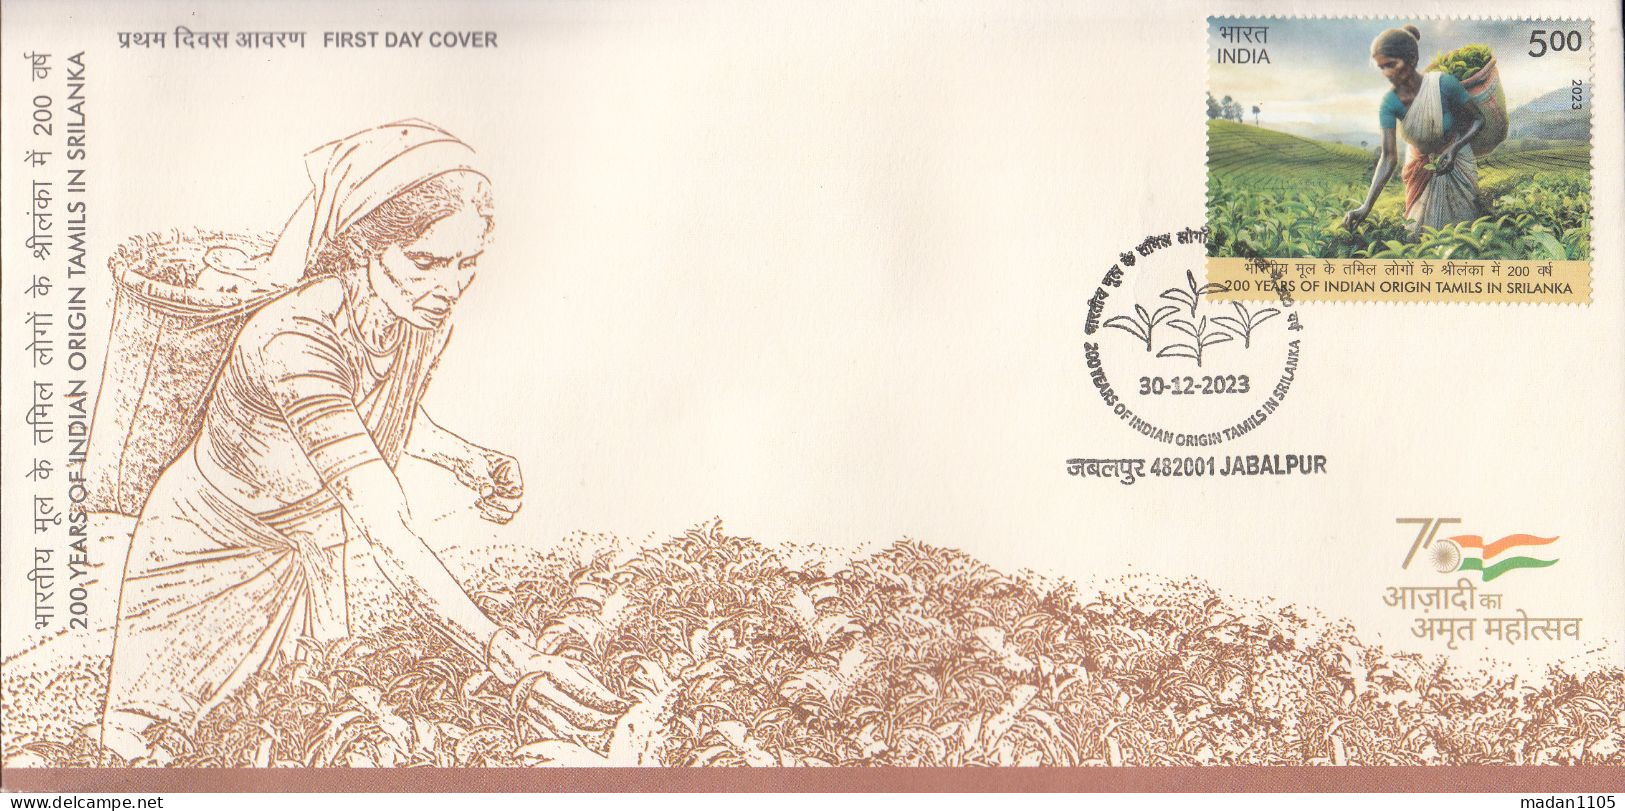 INDIA 2023 FDC 200 Years Of Indian Origin Tamils In Sri Lanka, First Day Cover, Jabalpur Cancelled. - FDC